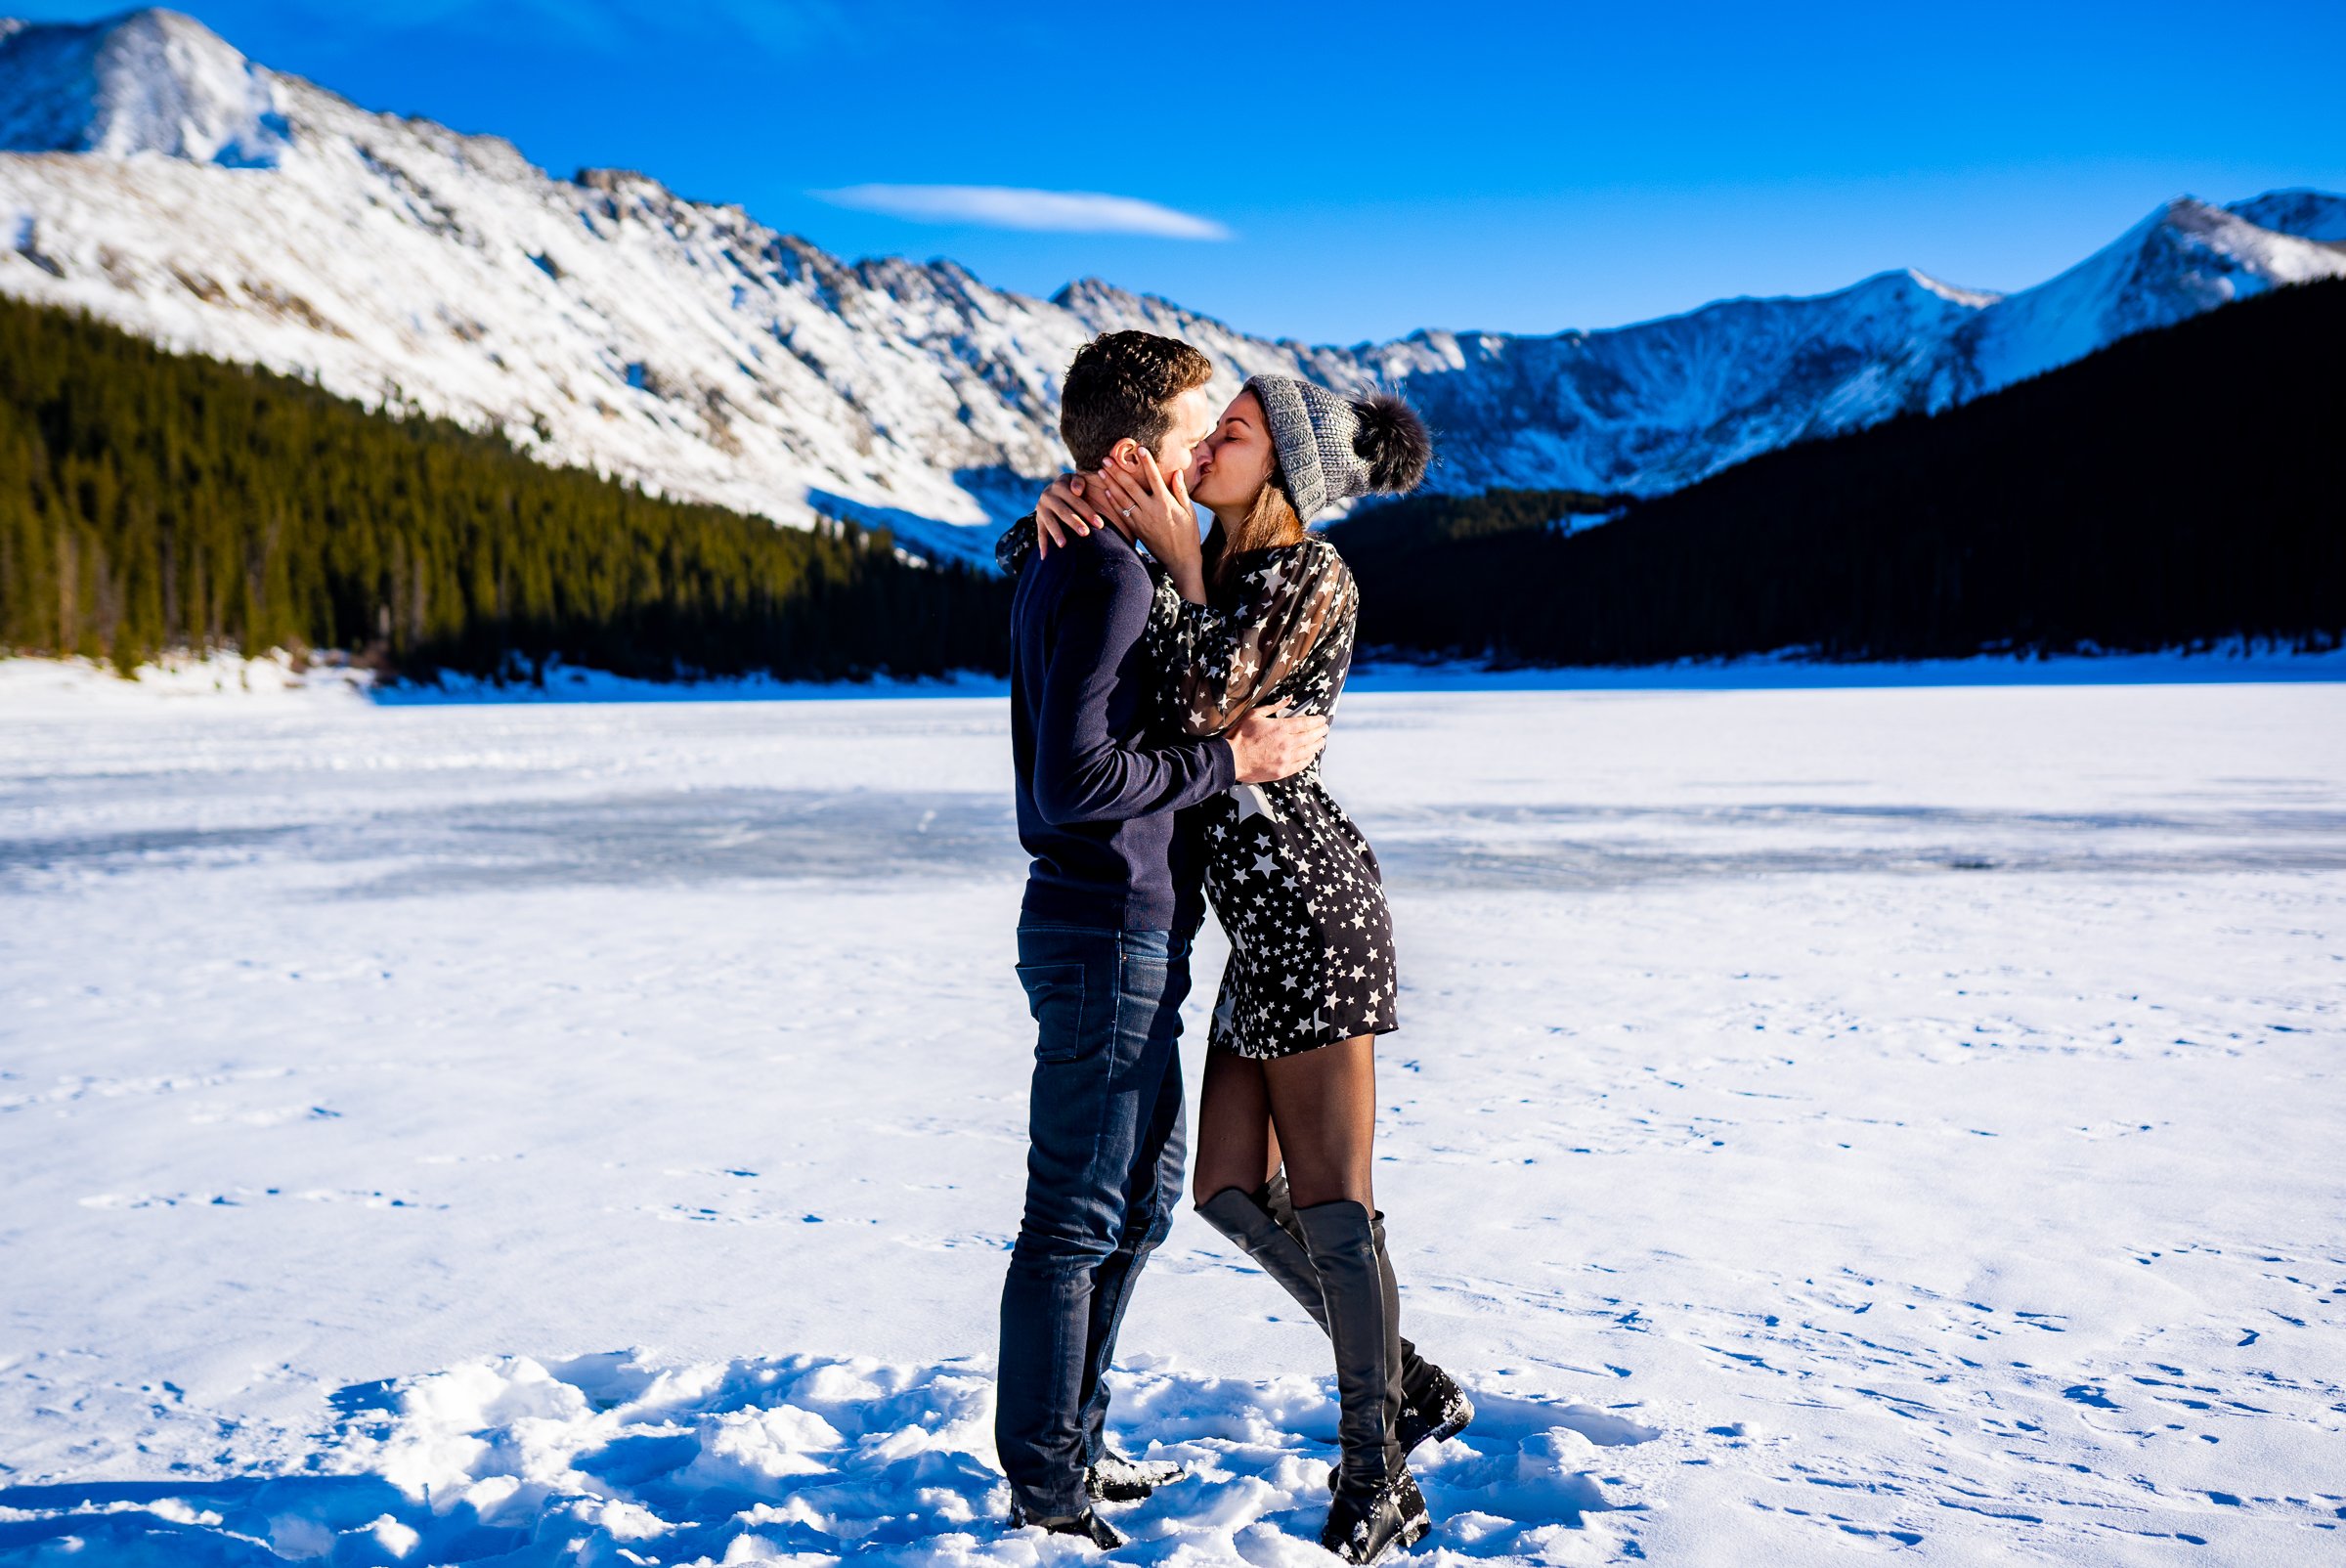 Newly engaged couple celebrate their proposal with a kiss on a frozen lake with snowcapped mountains in the background, Engagement Session, Engagement Photos, Engagement Photos Inspiration, Engagement Photography, Engagement Photographer, Winter Engagement Photos, Proposal Photos, Proposal Photographer, Proposal Photography, Winter Proposal, Mountain Proposal, Proposal Inspiration, Summit County engagement session, Summit County engagement photos, Summit County engagement photography, Summit County engagement photographer, Summit County engagement inspiration, Colorado engagement session, Colorado engagement photos, Colorado engagement photography, Colorado engagement photographer, Colorado engagement inspiration, Clinton Gulch Engagement